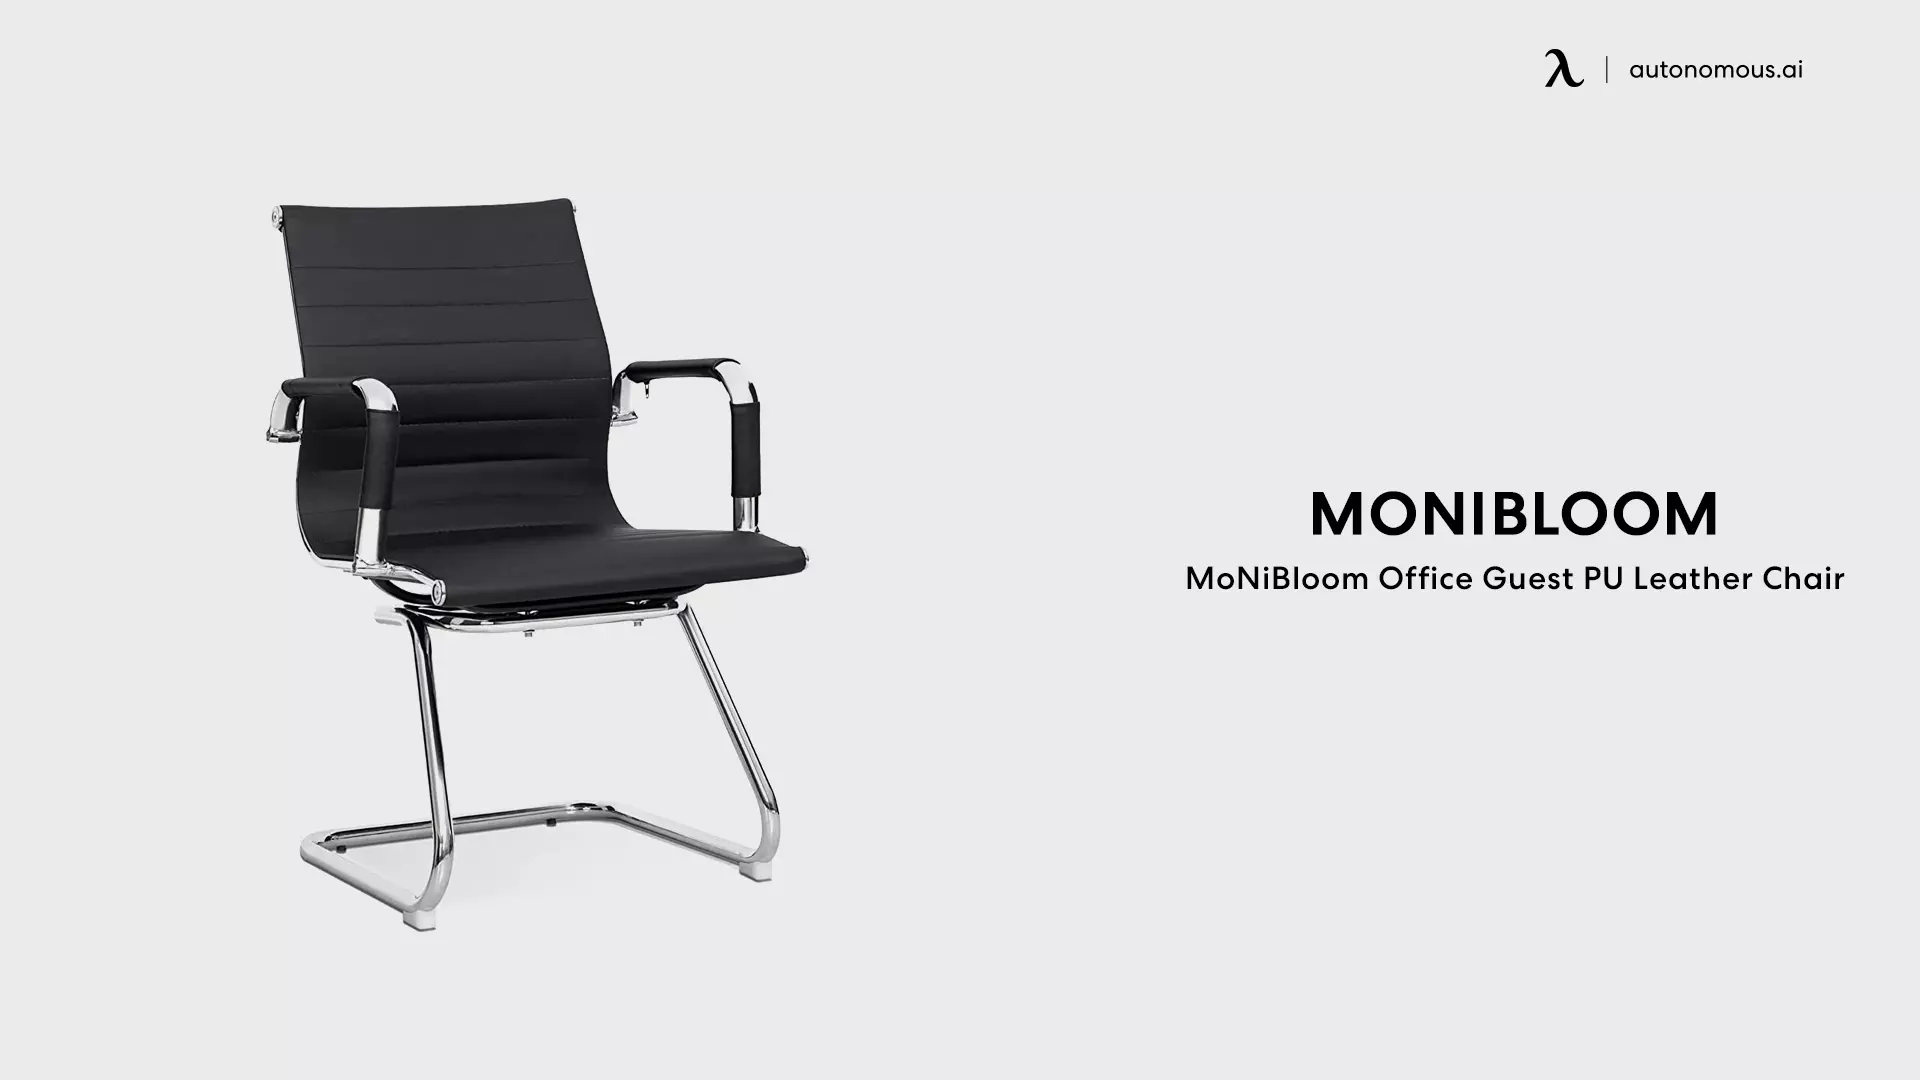 MoNiBloom Office Guest PU Leather Chair